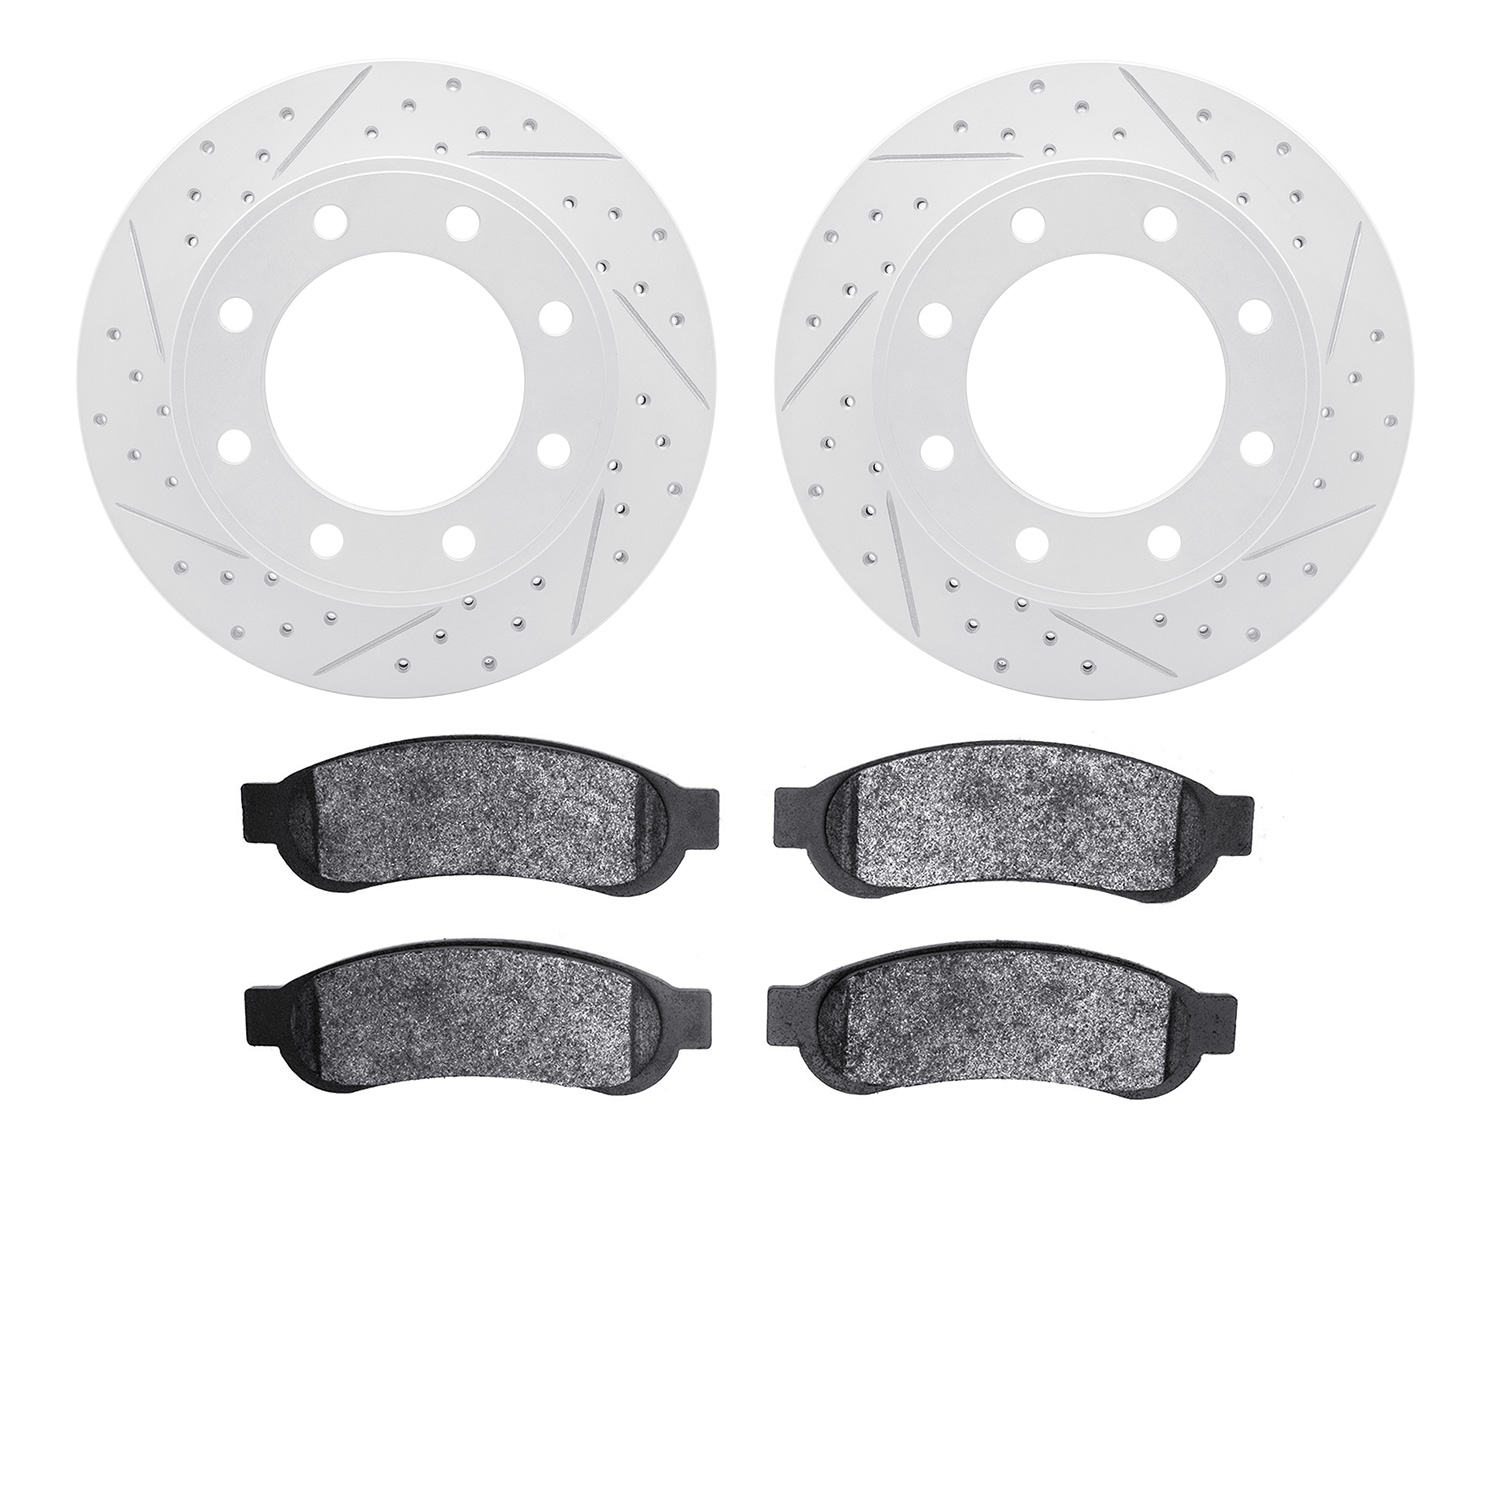 2402-54057 Geoperformance Drilled/Slotted Brake Rotors with Ultimate-Duty Brake Pads Kit, 2010-2012 Ford/Lincoln/Mercury/Mazda,